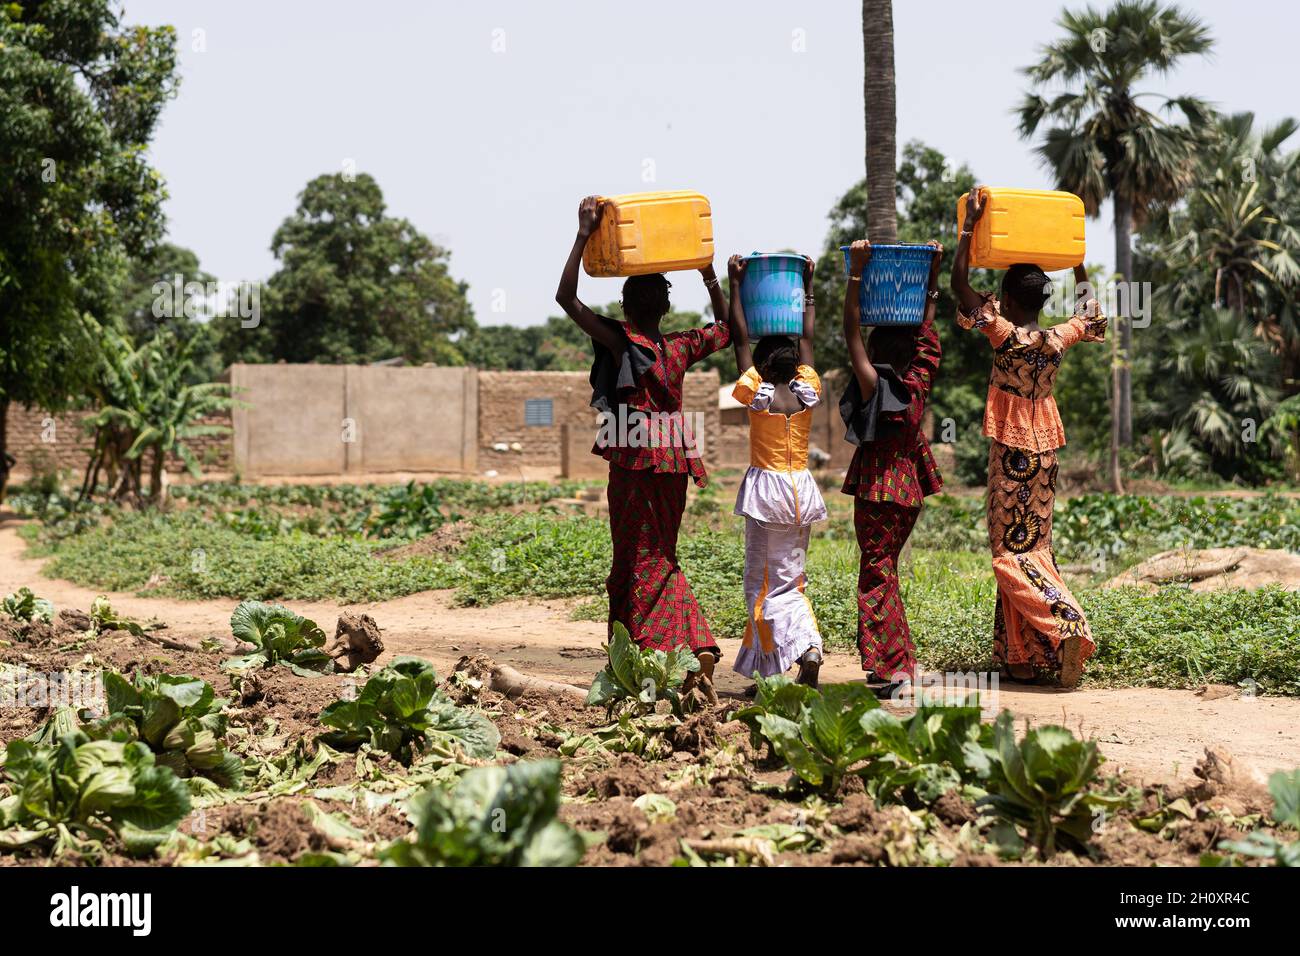 Group of young black West African girls carrying heavy water containers on their head; child labor concept Stock Photo